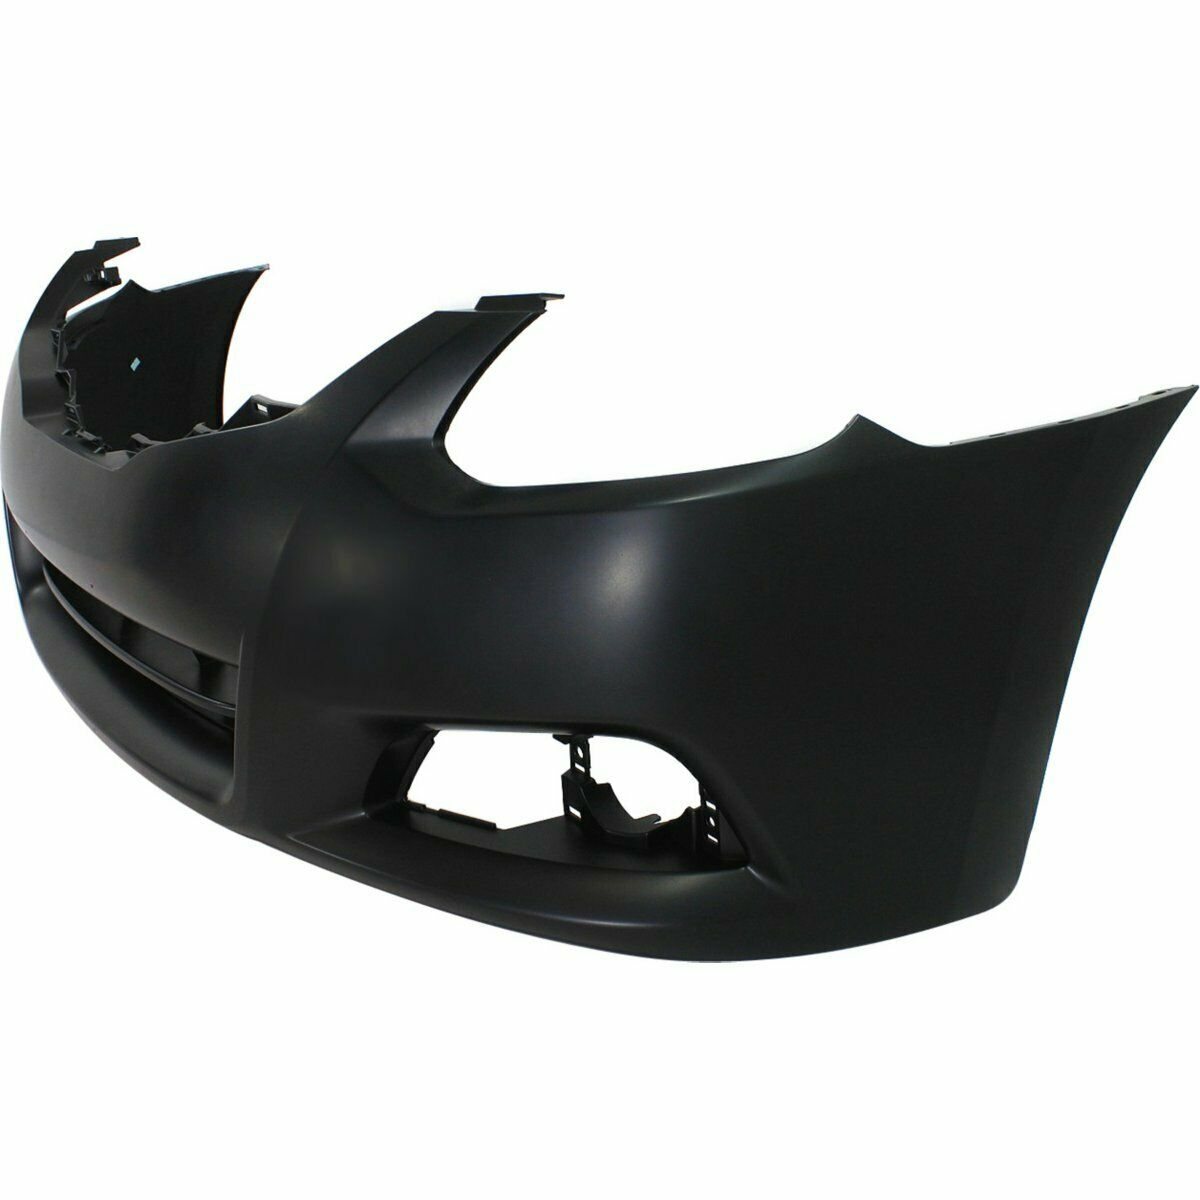 2010-2012 Nissan Altima Coupe Front Bumper Painted to Match